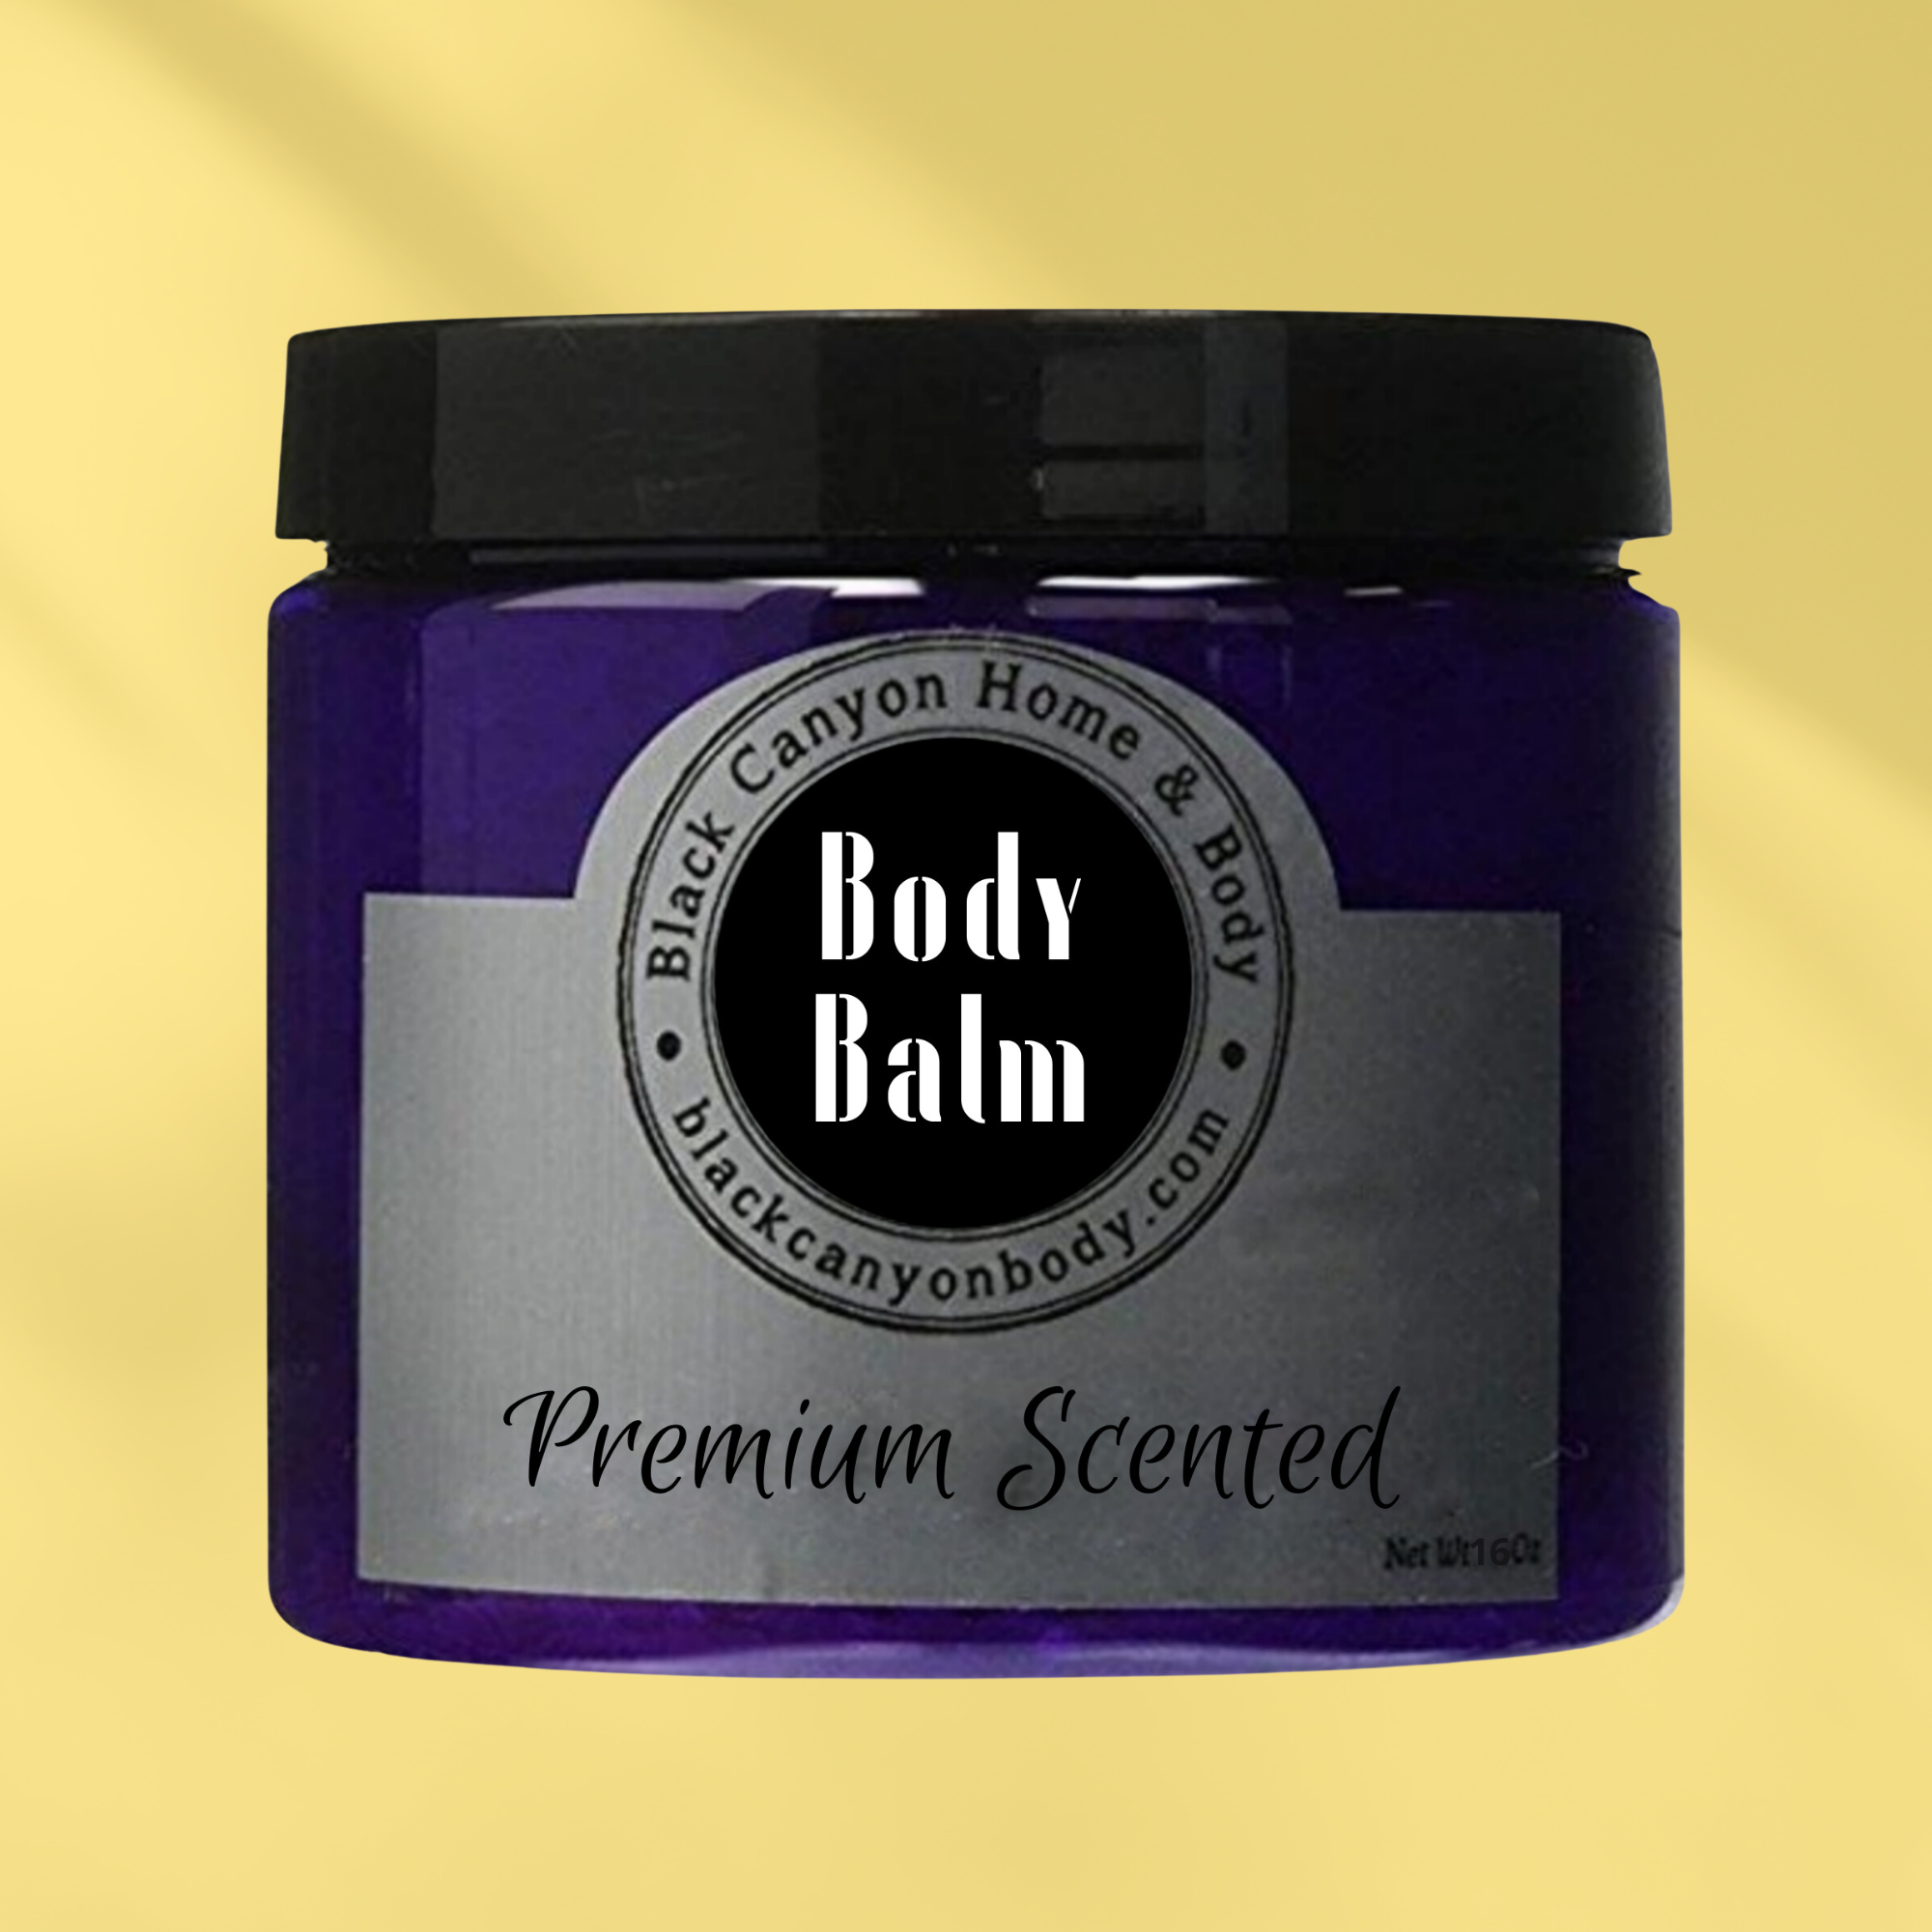 Black Canyon Pumpkin Spice Scented Natural Body Balm with Shea